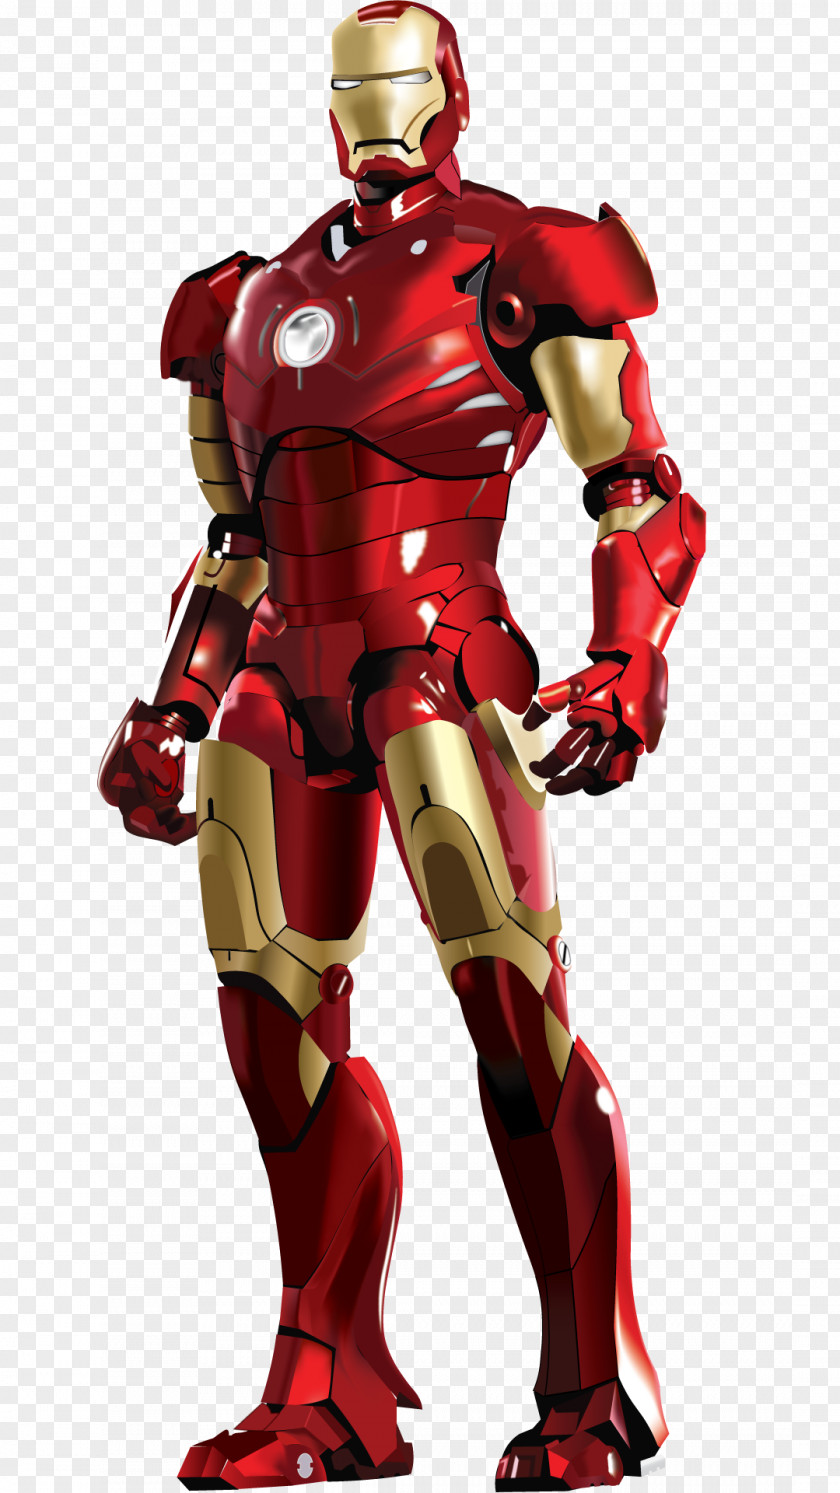 Iron Man Marvel Cinematic Universe Hot Toys Limited Sideshow Collectibles Action & Toy Figures PNG